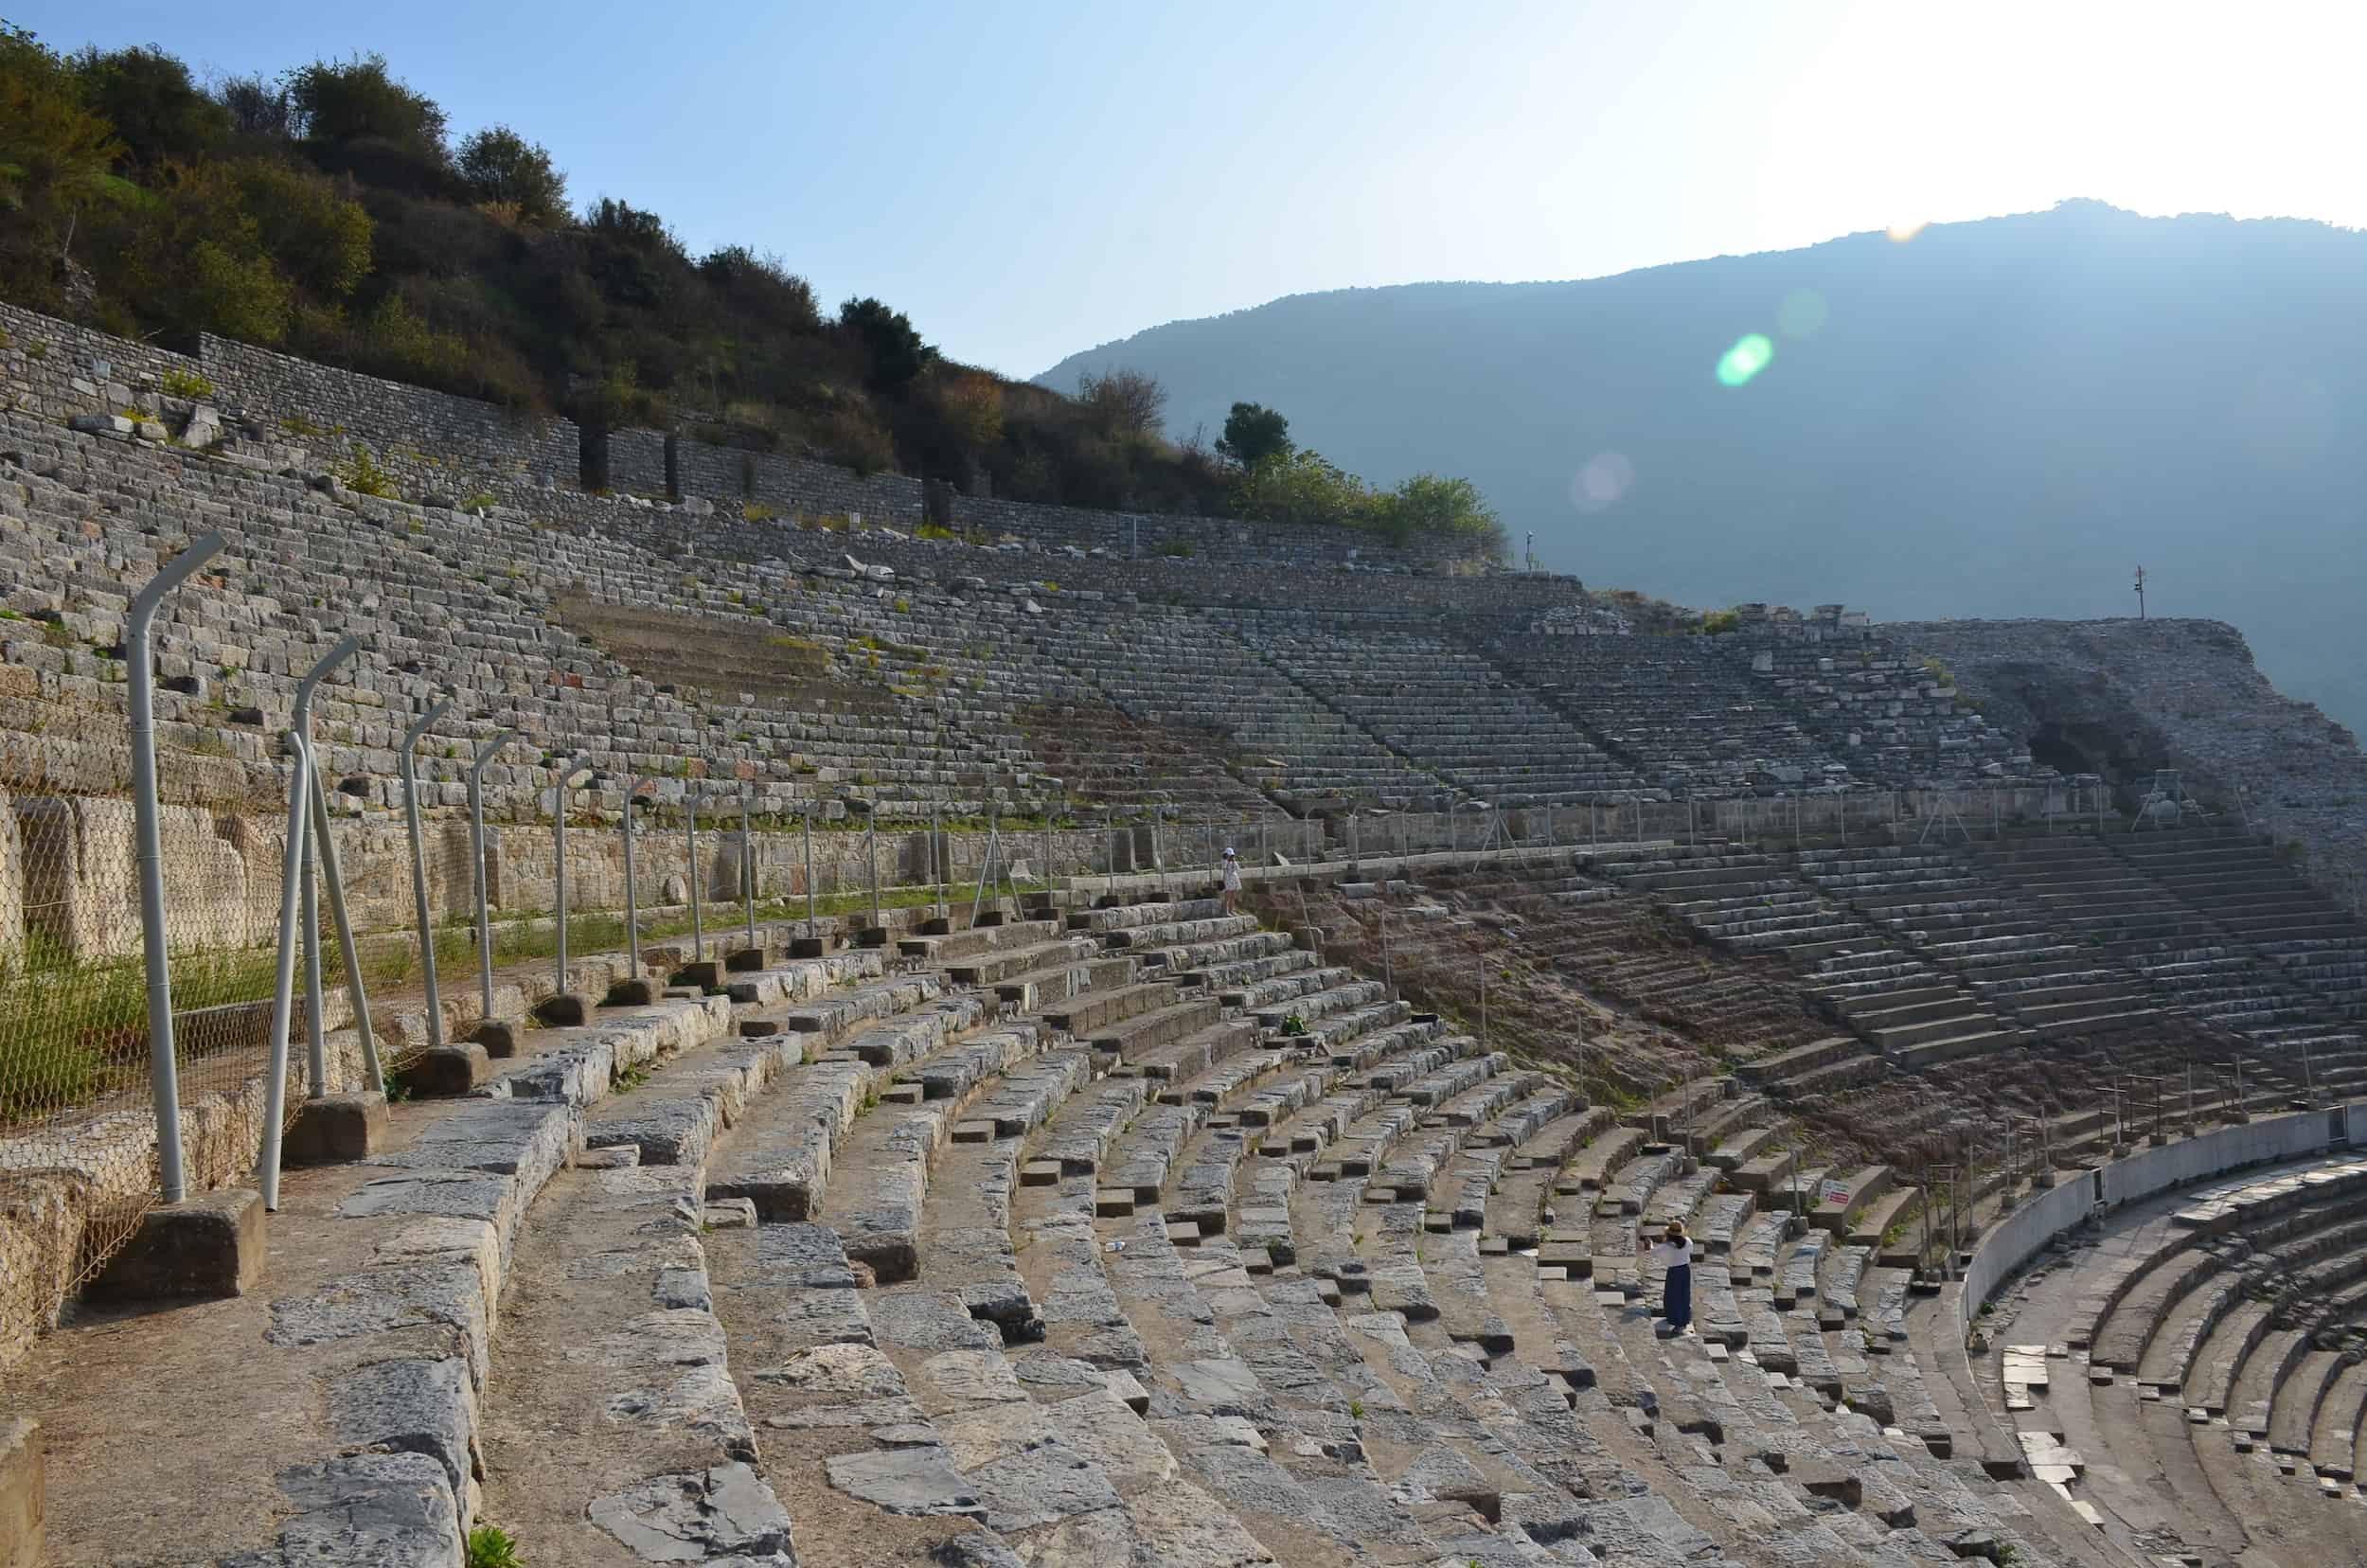 Upper seating area at the Great Theatre of Ephesus